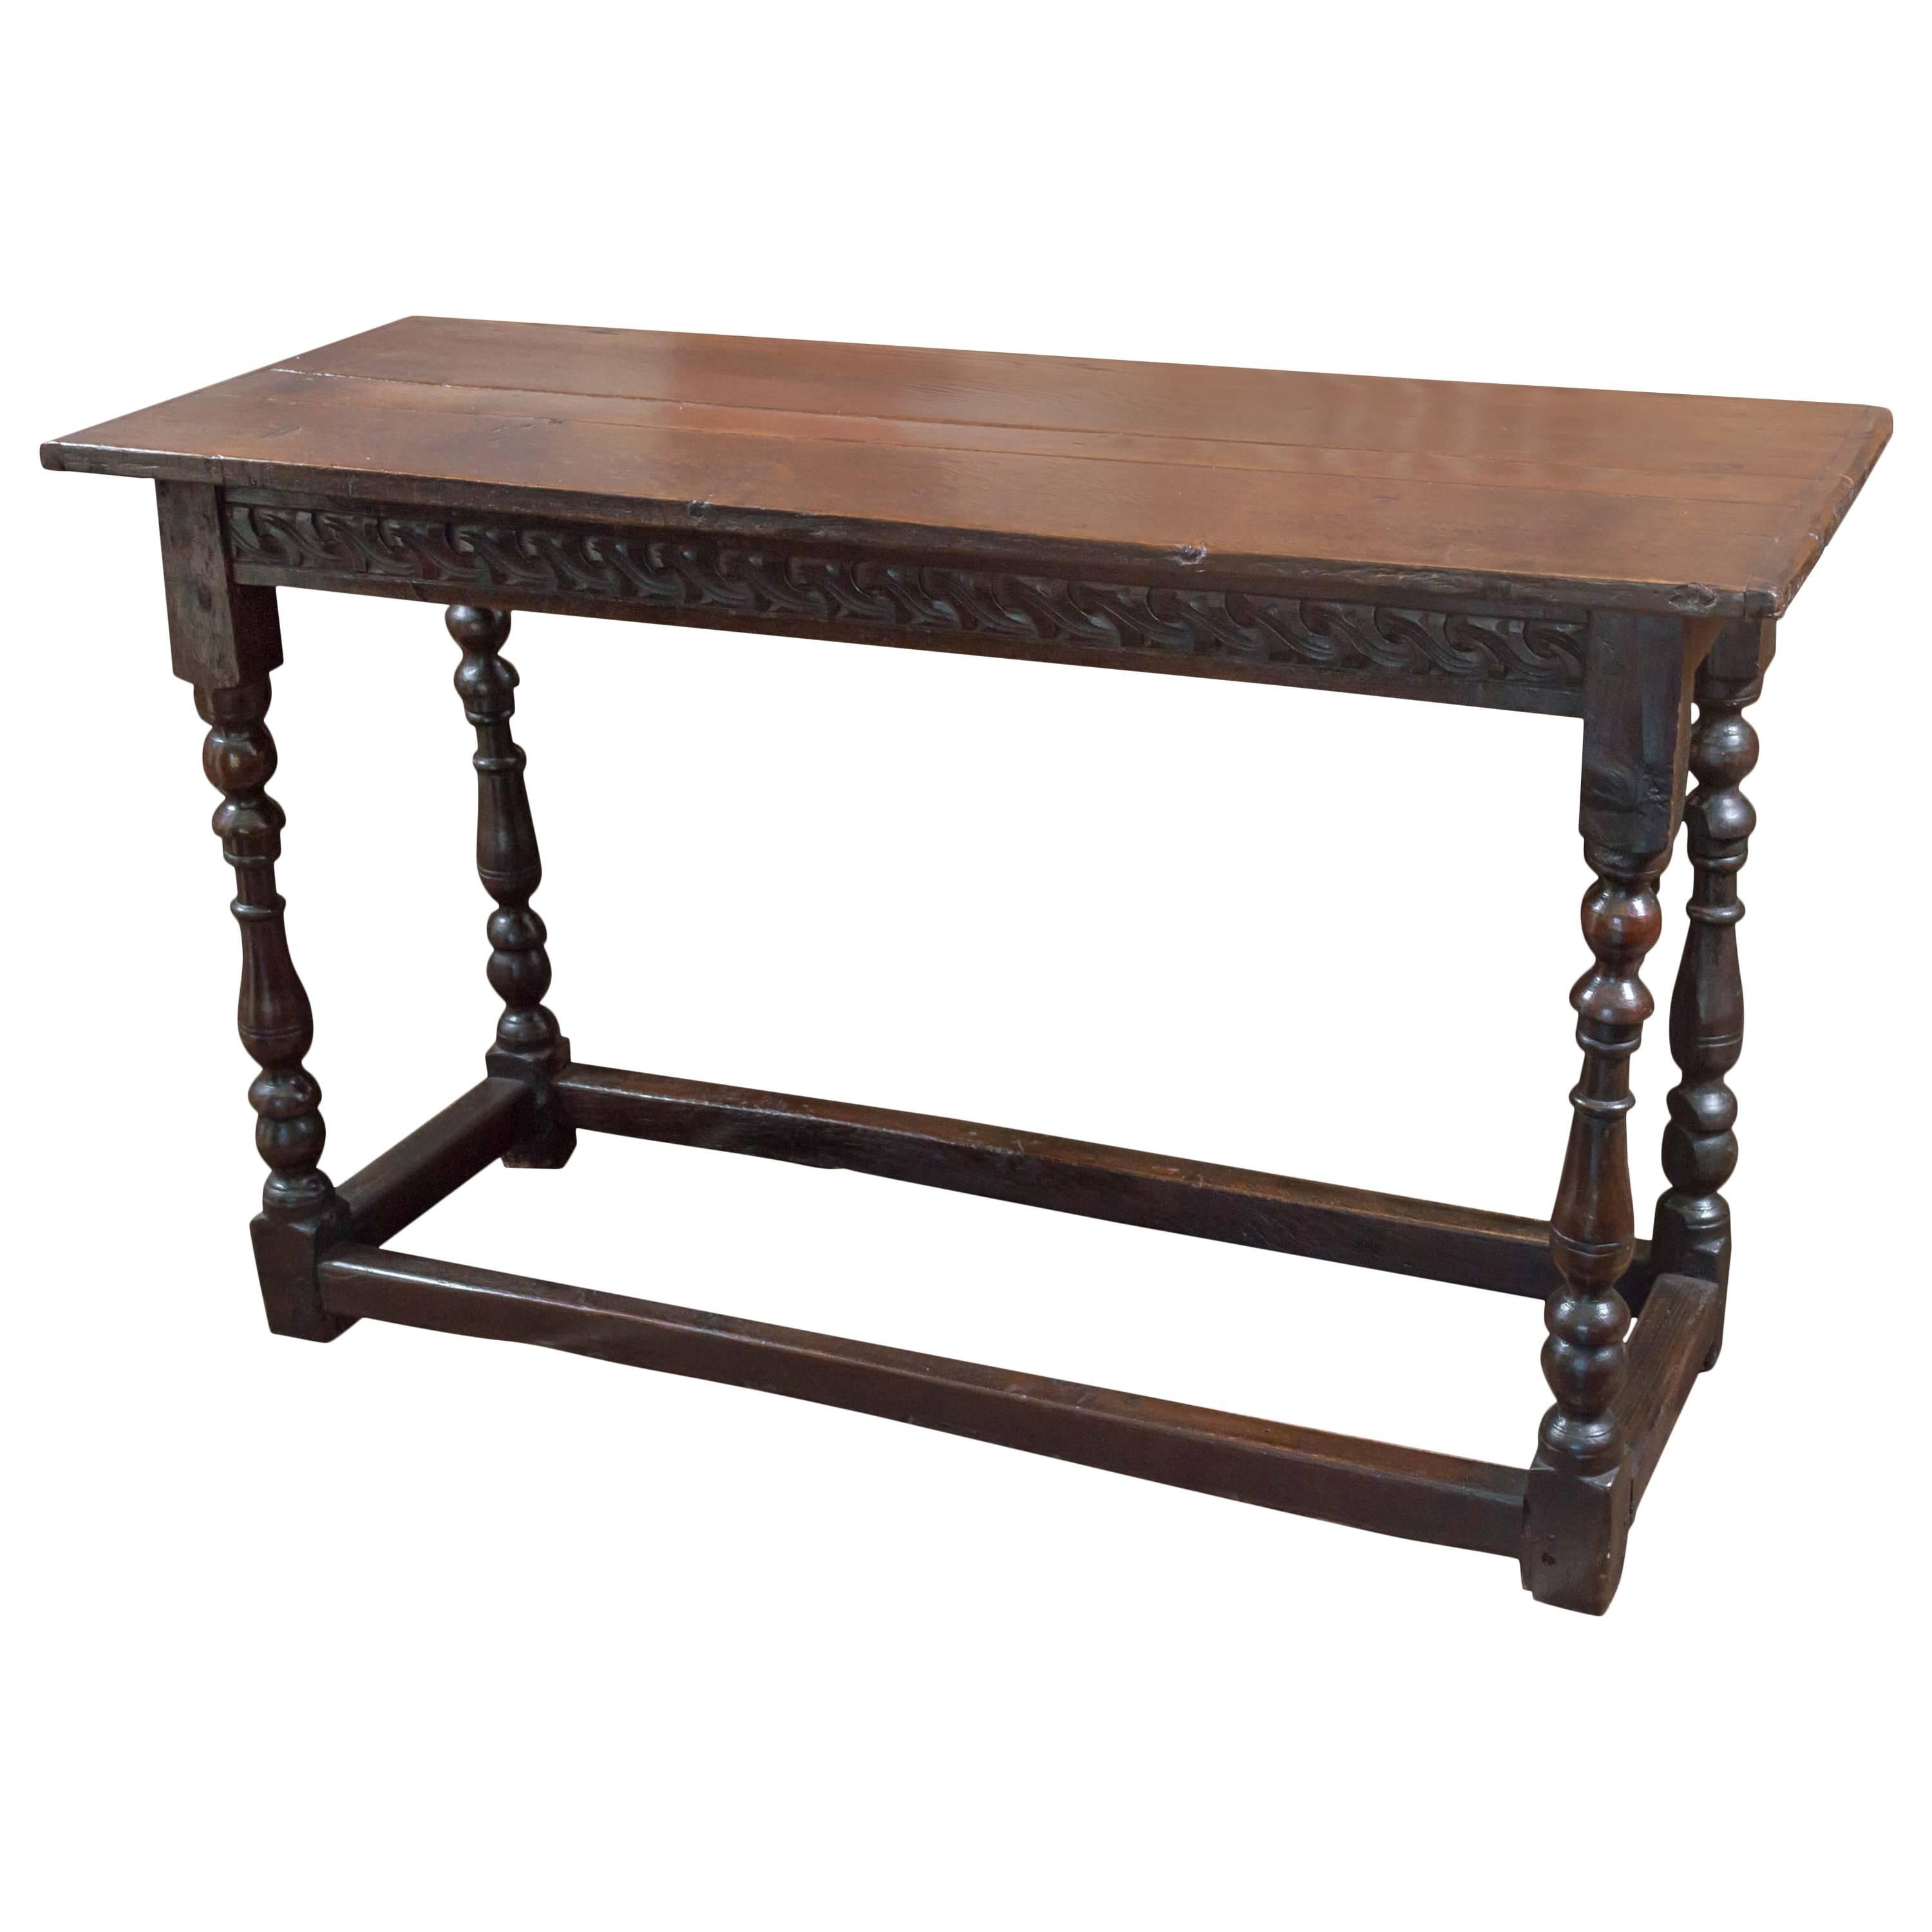 Narrow English Oak Side Table with Carved Apron, circa 1770 For Sale